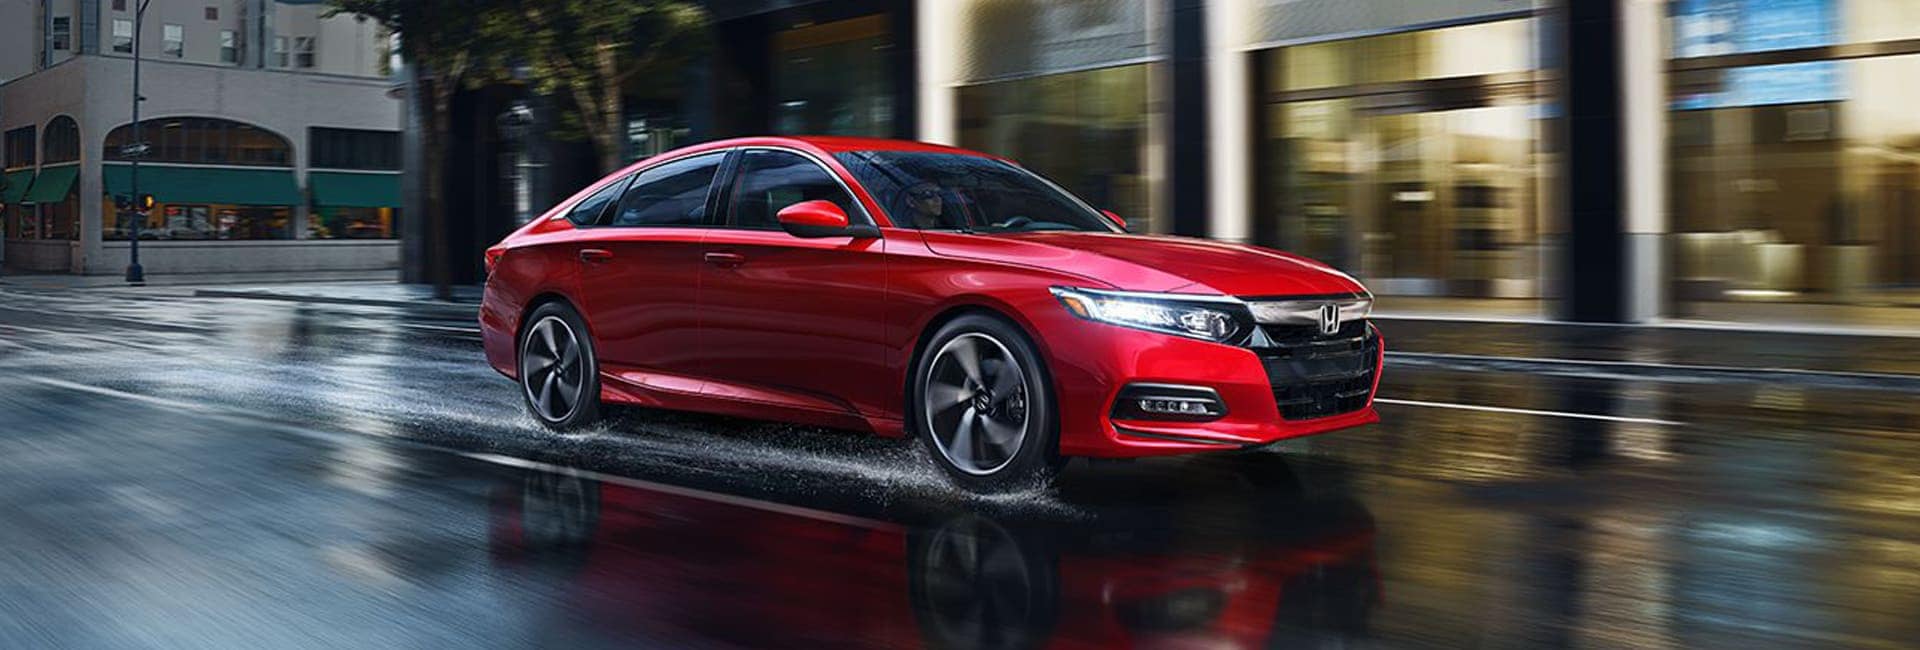 New Honda Accord Finance and Lease Offers LeadCar Honda Yorkville